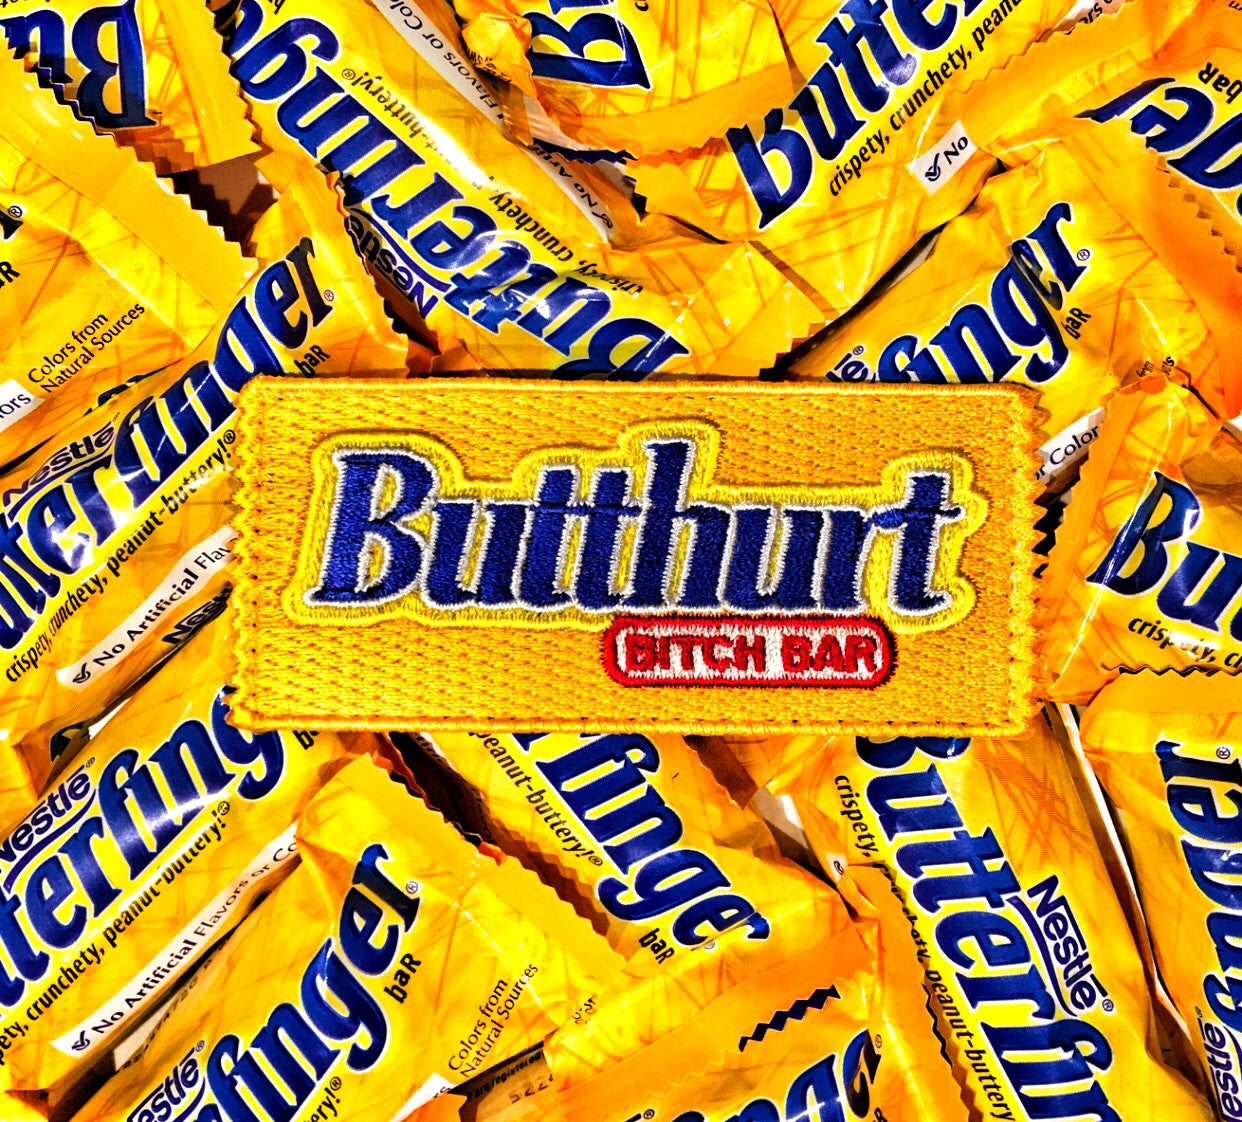 Yellow candy bar shaped embroidered patch with text in blue that reads Butthurt bitch bar